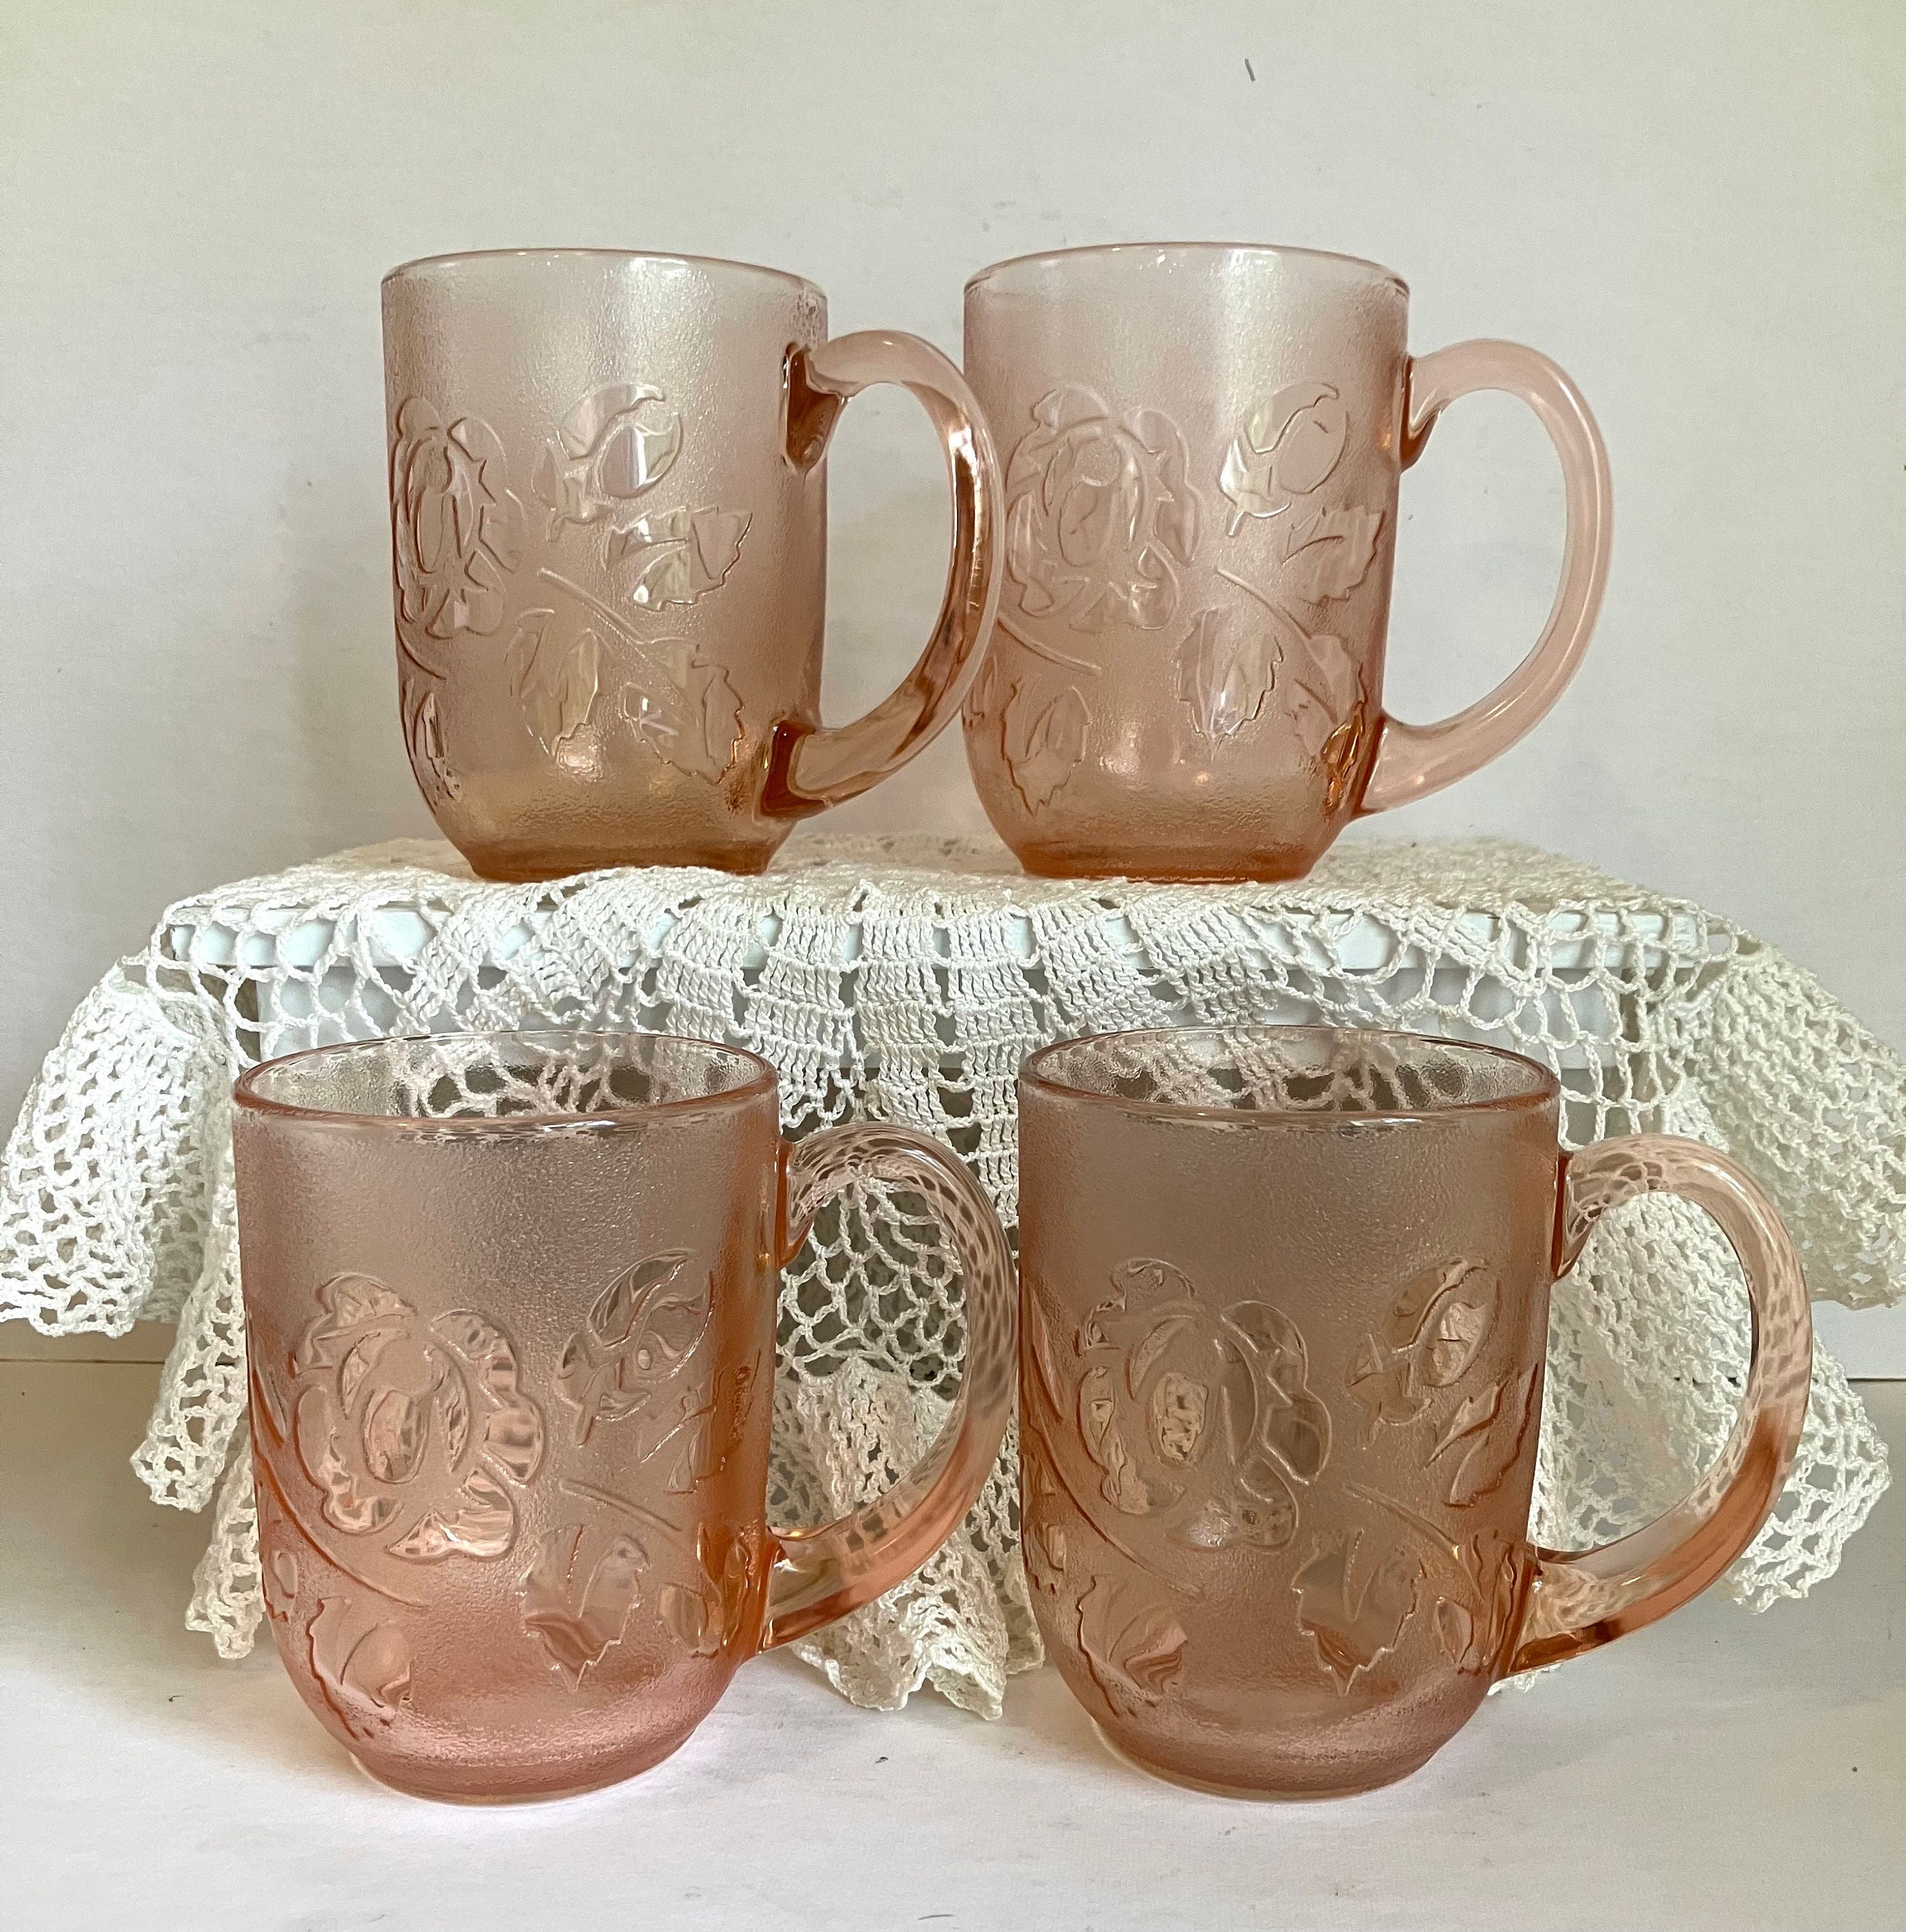 INS Amber Vintage Embossed Glass Cup Good-looking Girly Heart Water Cups  Latte Coffee Mug with